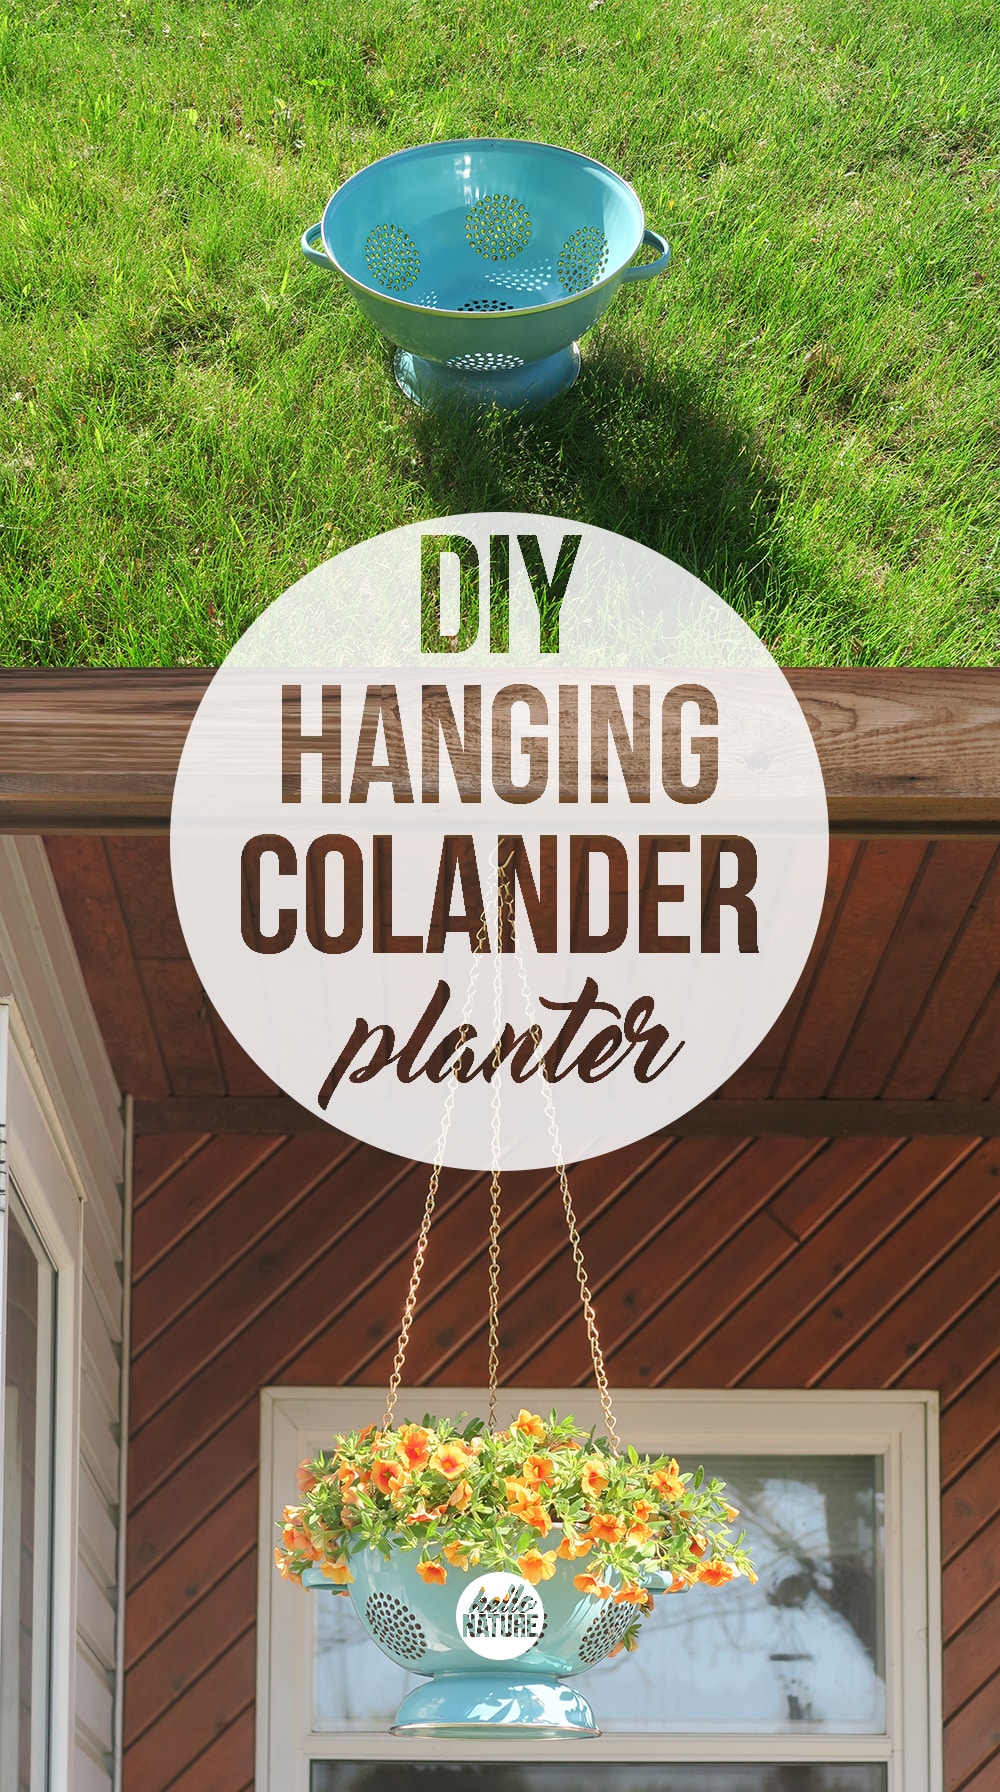 Container gardening just got more fun! With just a few supplies, you can turn a simple kitchen utensil into a unique DIY Hanging Colander Planter.